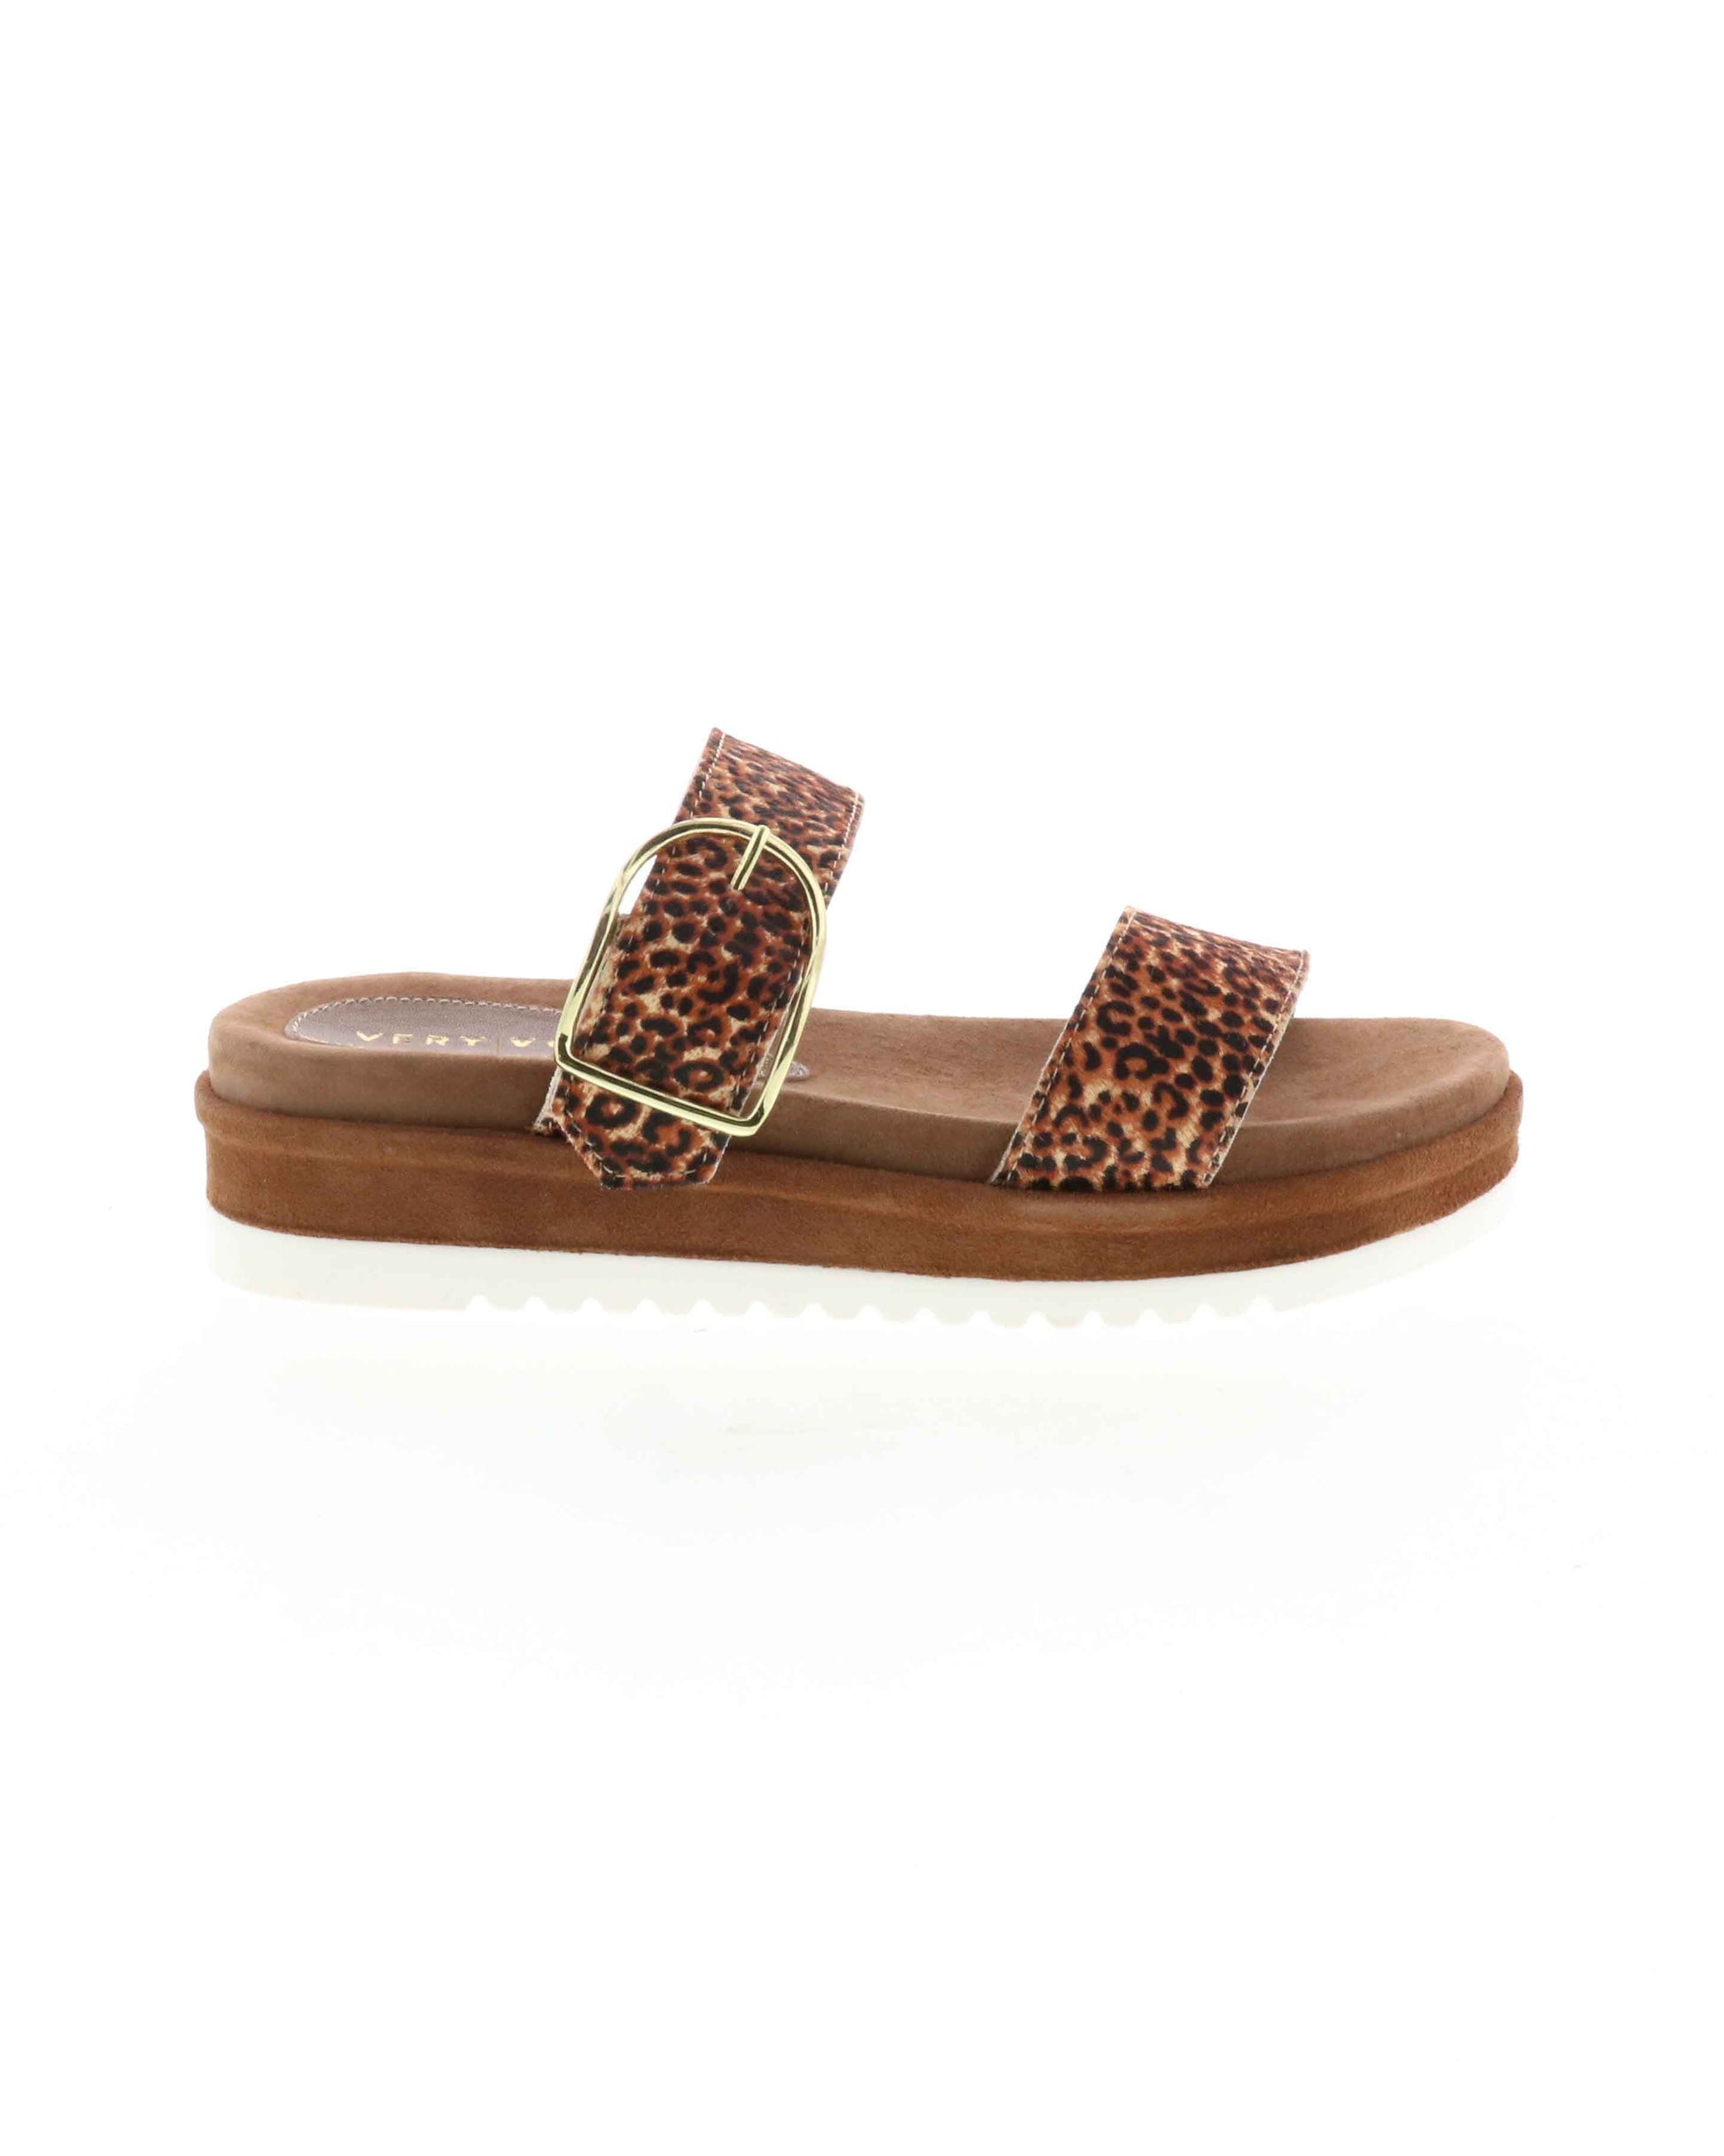 DOUBLE STRAP MINI FLATFORM SANDAL - Genuine calf-hair upper - Leather lining - Adjustable metal buckle - Two band slip-on sandal style - Anatomic suede covered footbed - Suede covered low platform bottom - White ridged outsole - Approx. 1.5" heel height tan leopard side